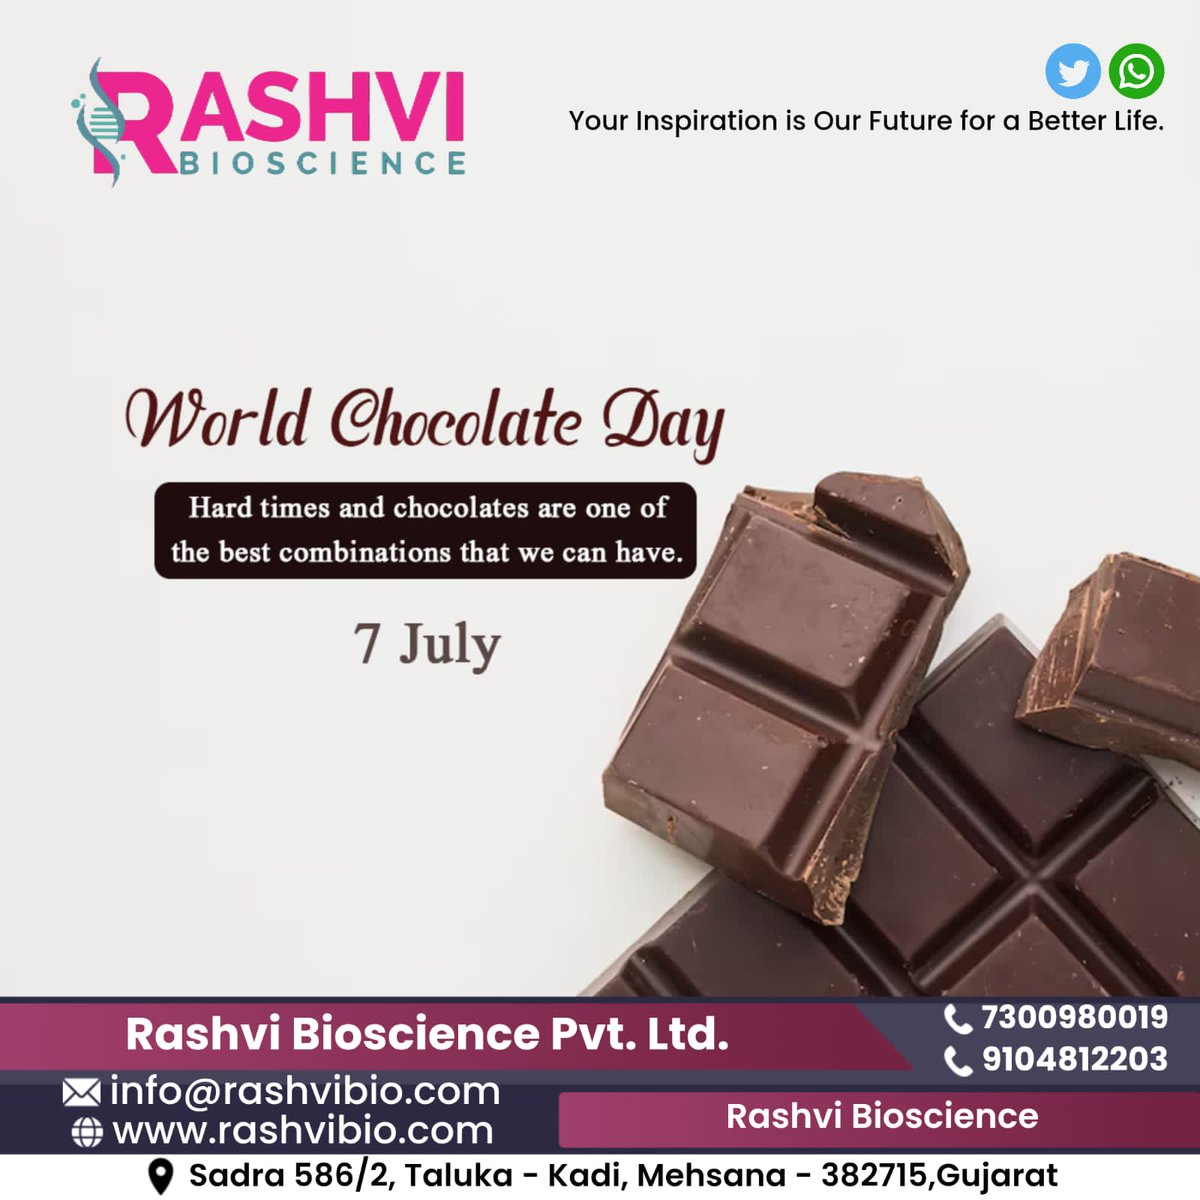 Hard Times and Chocolate are one of the best combinations that we can have.#WorldChocolateDay
#ChocolateDay
#HappyWorldChocolateDay
#ChocolateLover
#ChocolateAddict
#ChocolateDessert
#ChocolateTreat
#ChocolateYummy
#ChocolateHeaven
#ChocolateIsLife